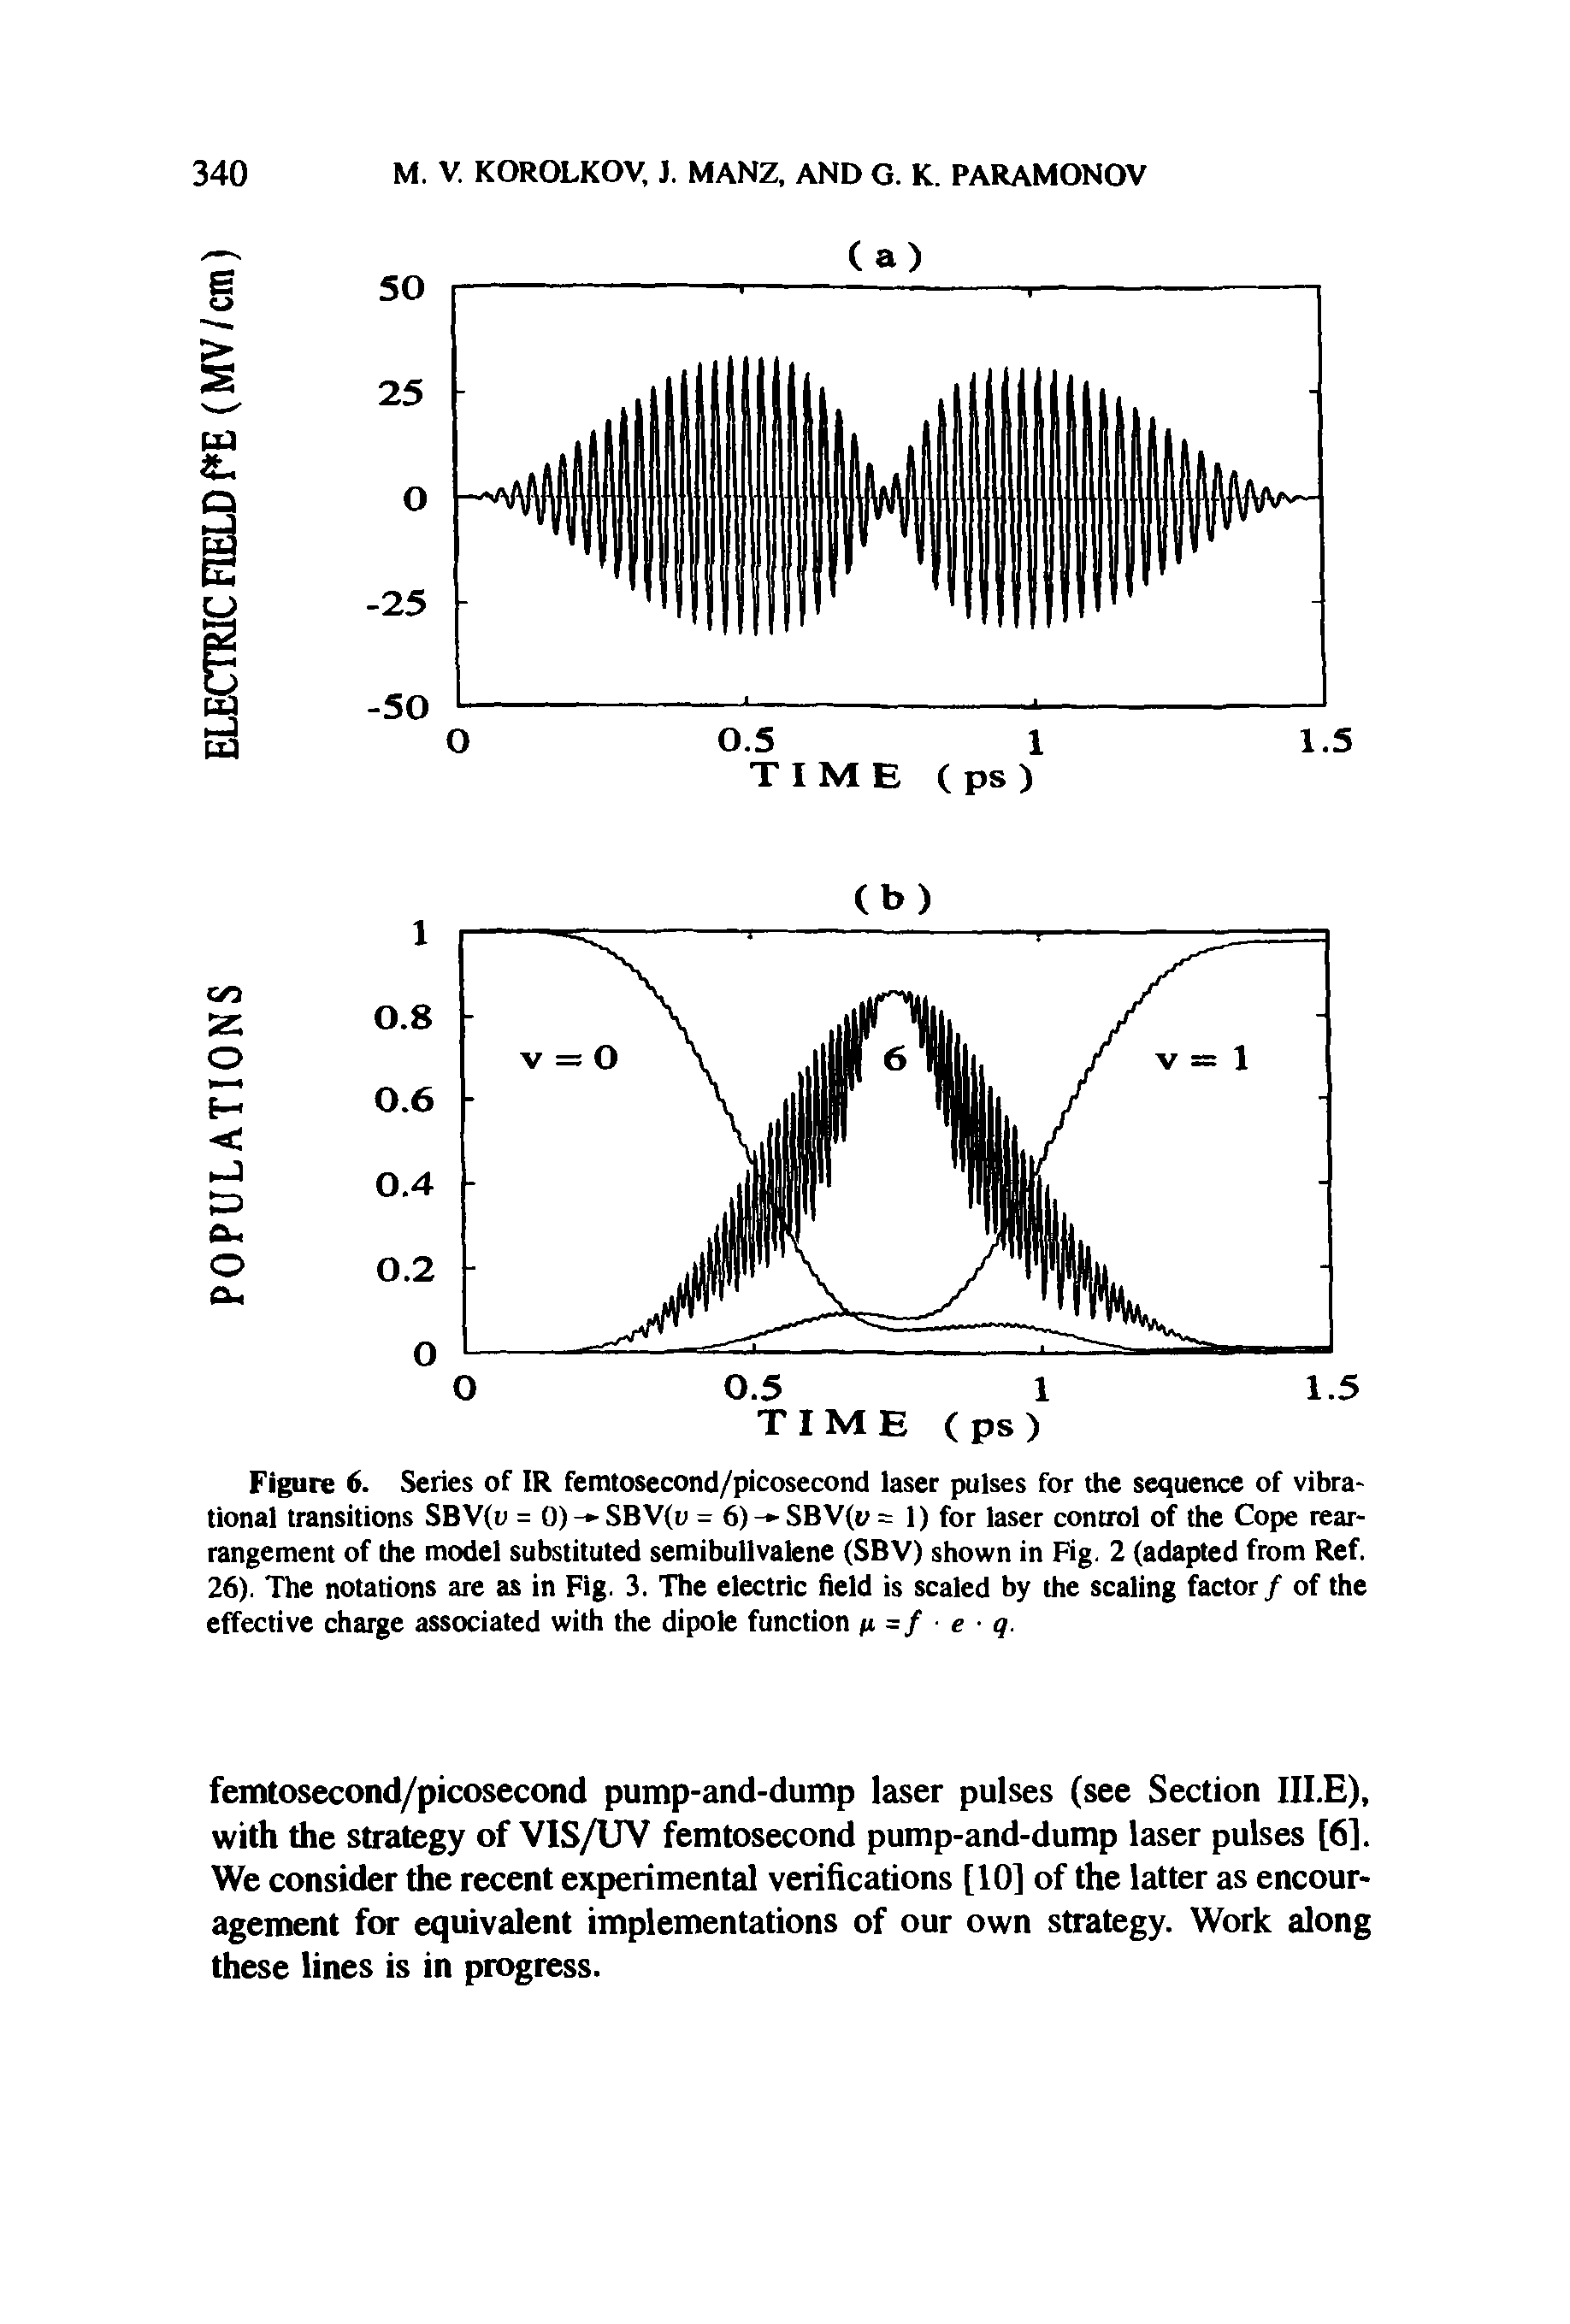 Figure 6. Series of IR femtosecond/picosecond laser pulses for the sequence of vibrational transitions SBV(u = 0) - SBV(u = 6) - SBV(t> = 1) for laser control of the Cope rearrangement of the model substituted semibullvalene (SBV) shown in Fig. 2 (adapted from Ref. 26). The notations are as in Fig. 3. The electric field is scaled by the scaling factor / of the effective charge associated with the dipole function jt =/ e q.